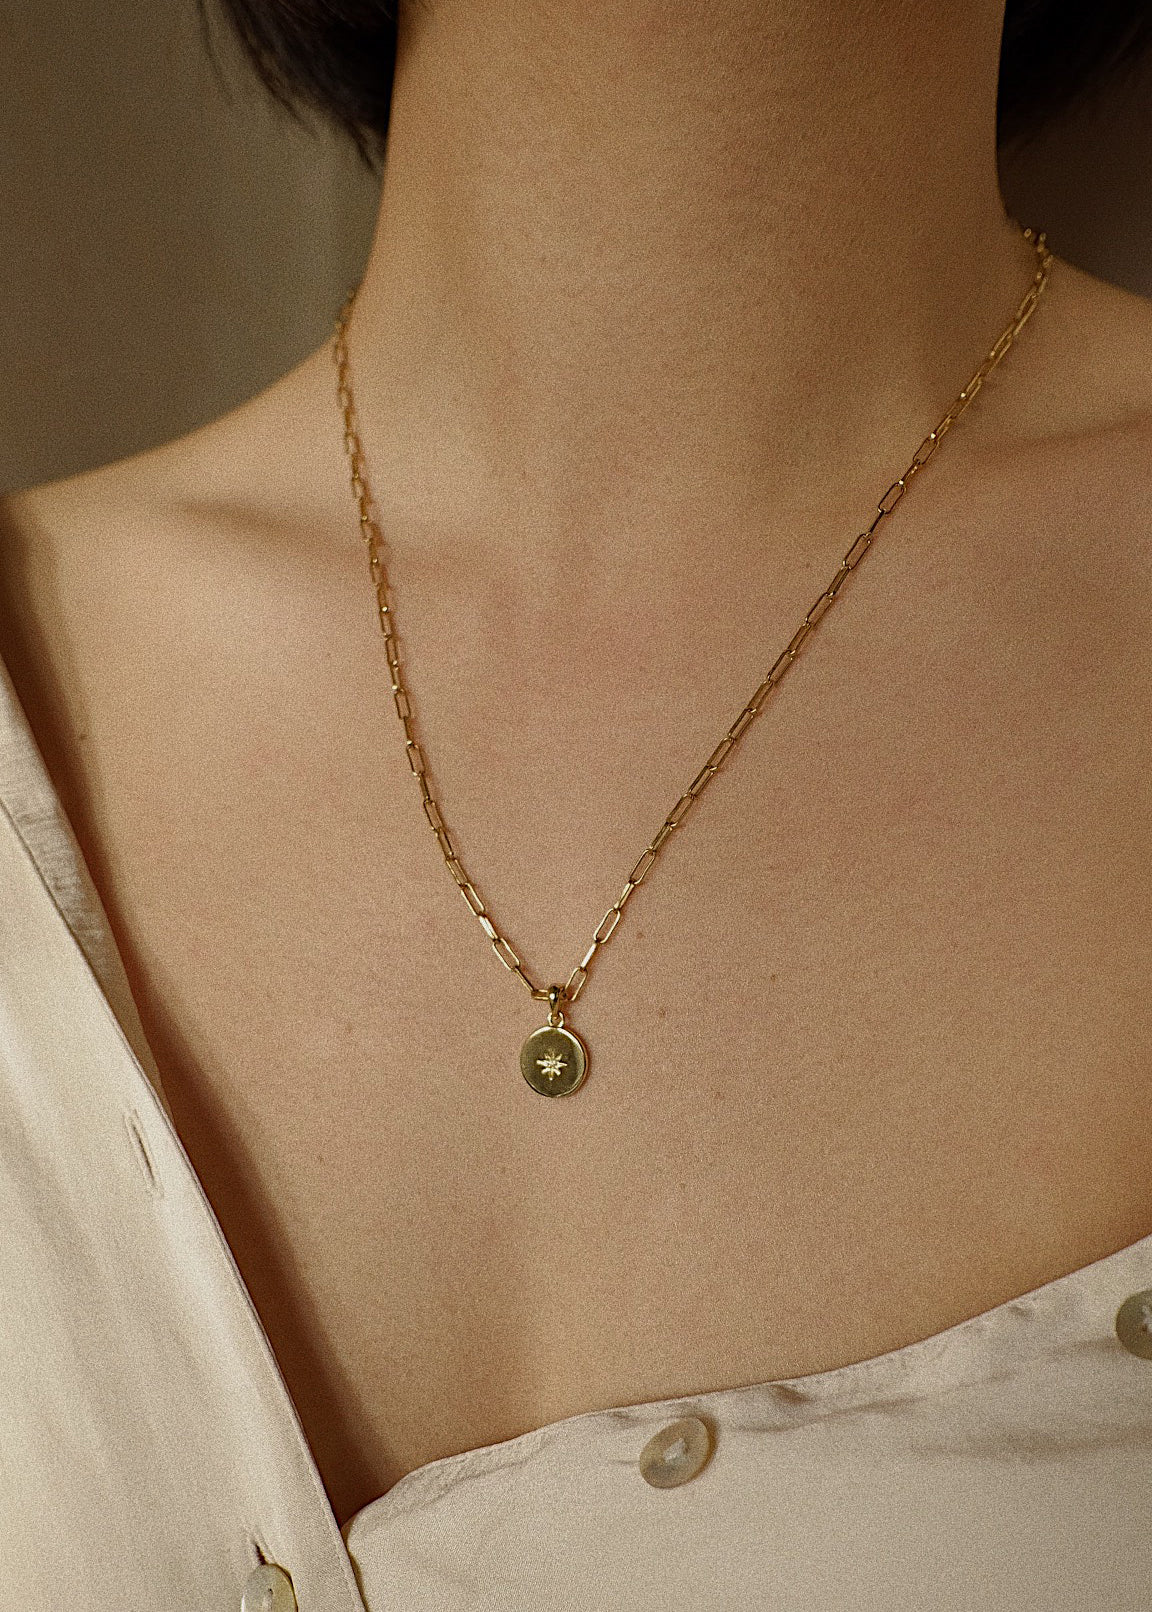 North Star Chain Necklace in Gold